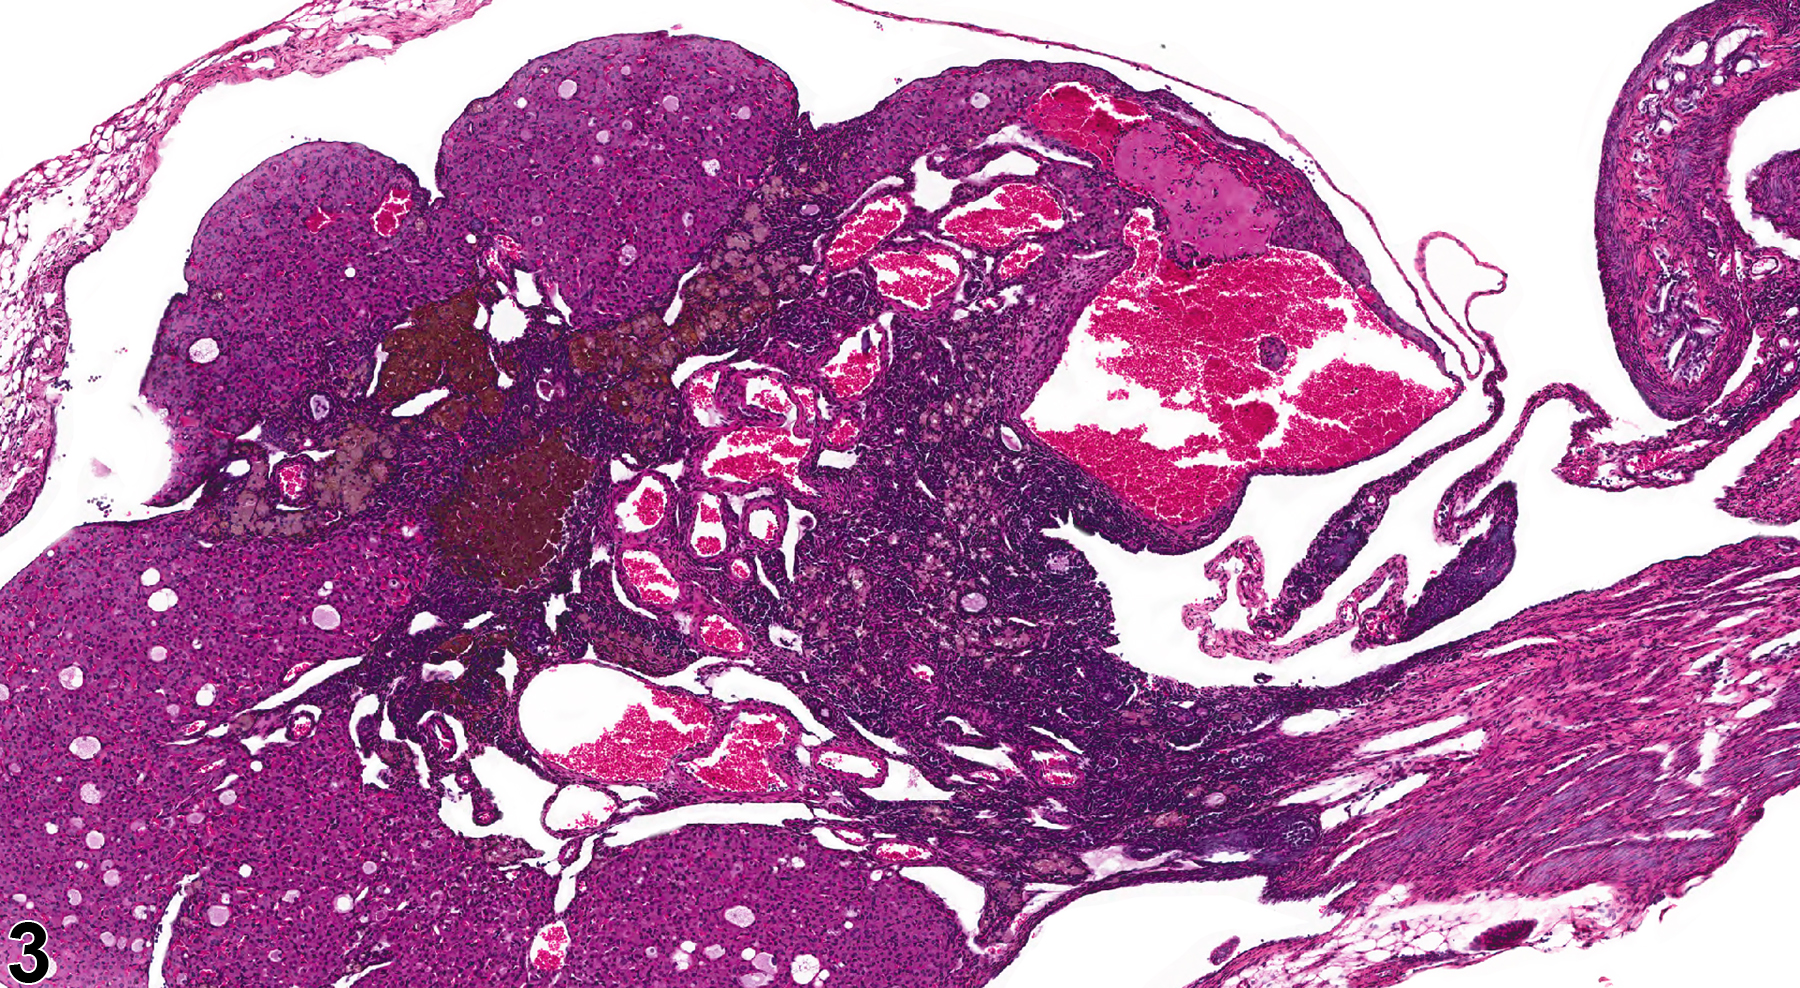 Image of pigment in the ovary from a female B6C3F1 mouse in a chronic study